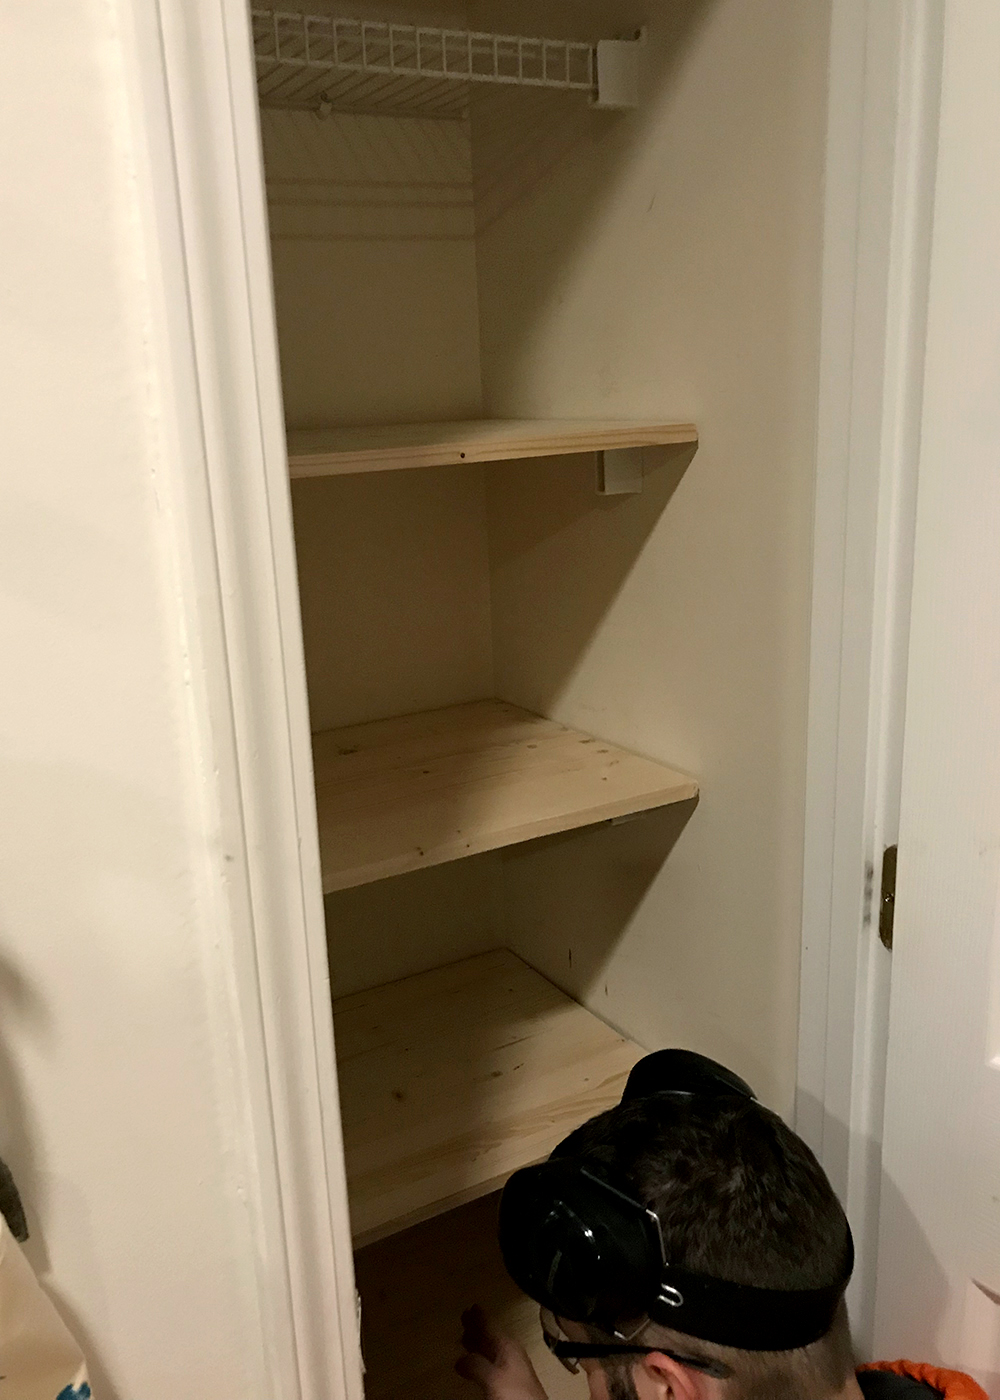 check the width of each shelf before removing wire shelving